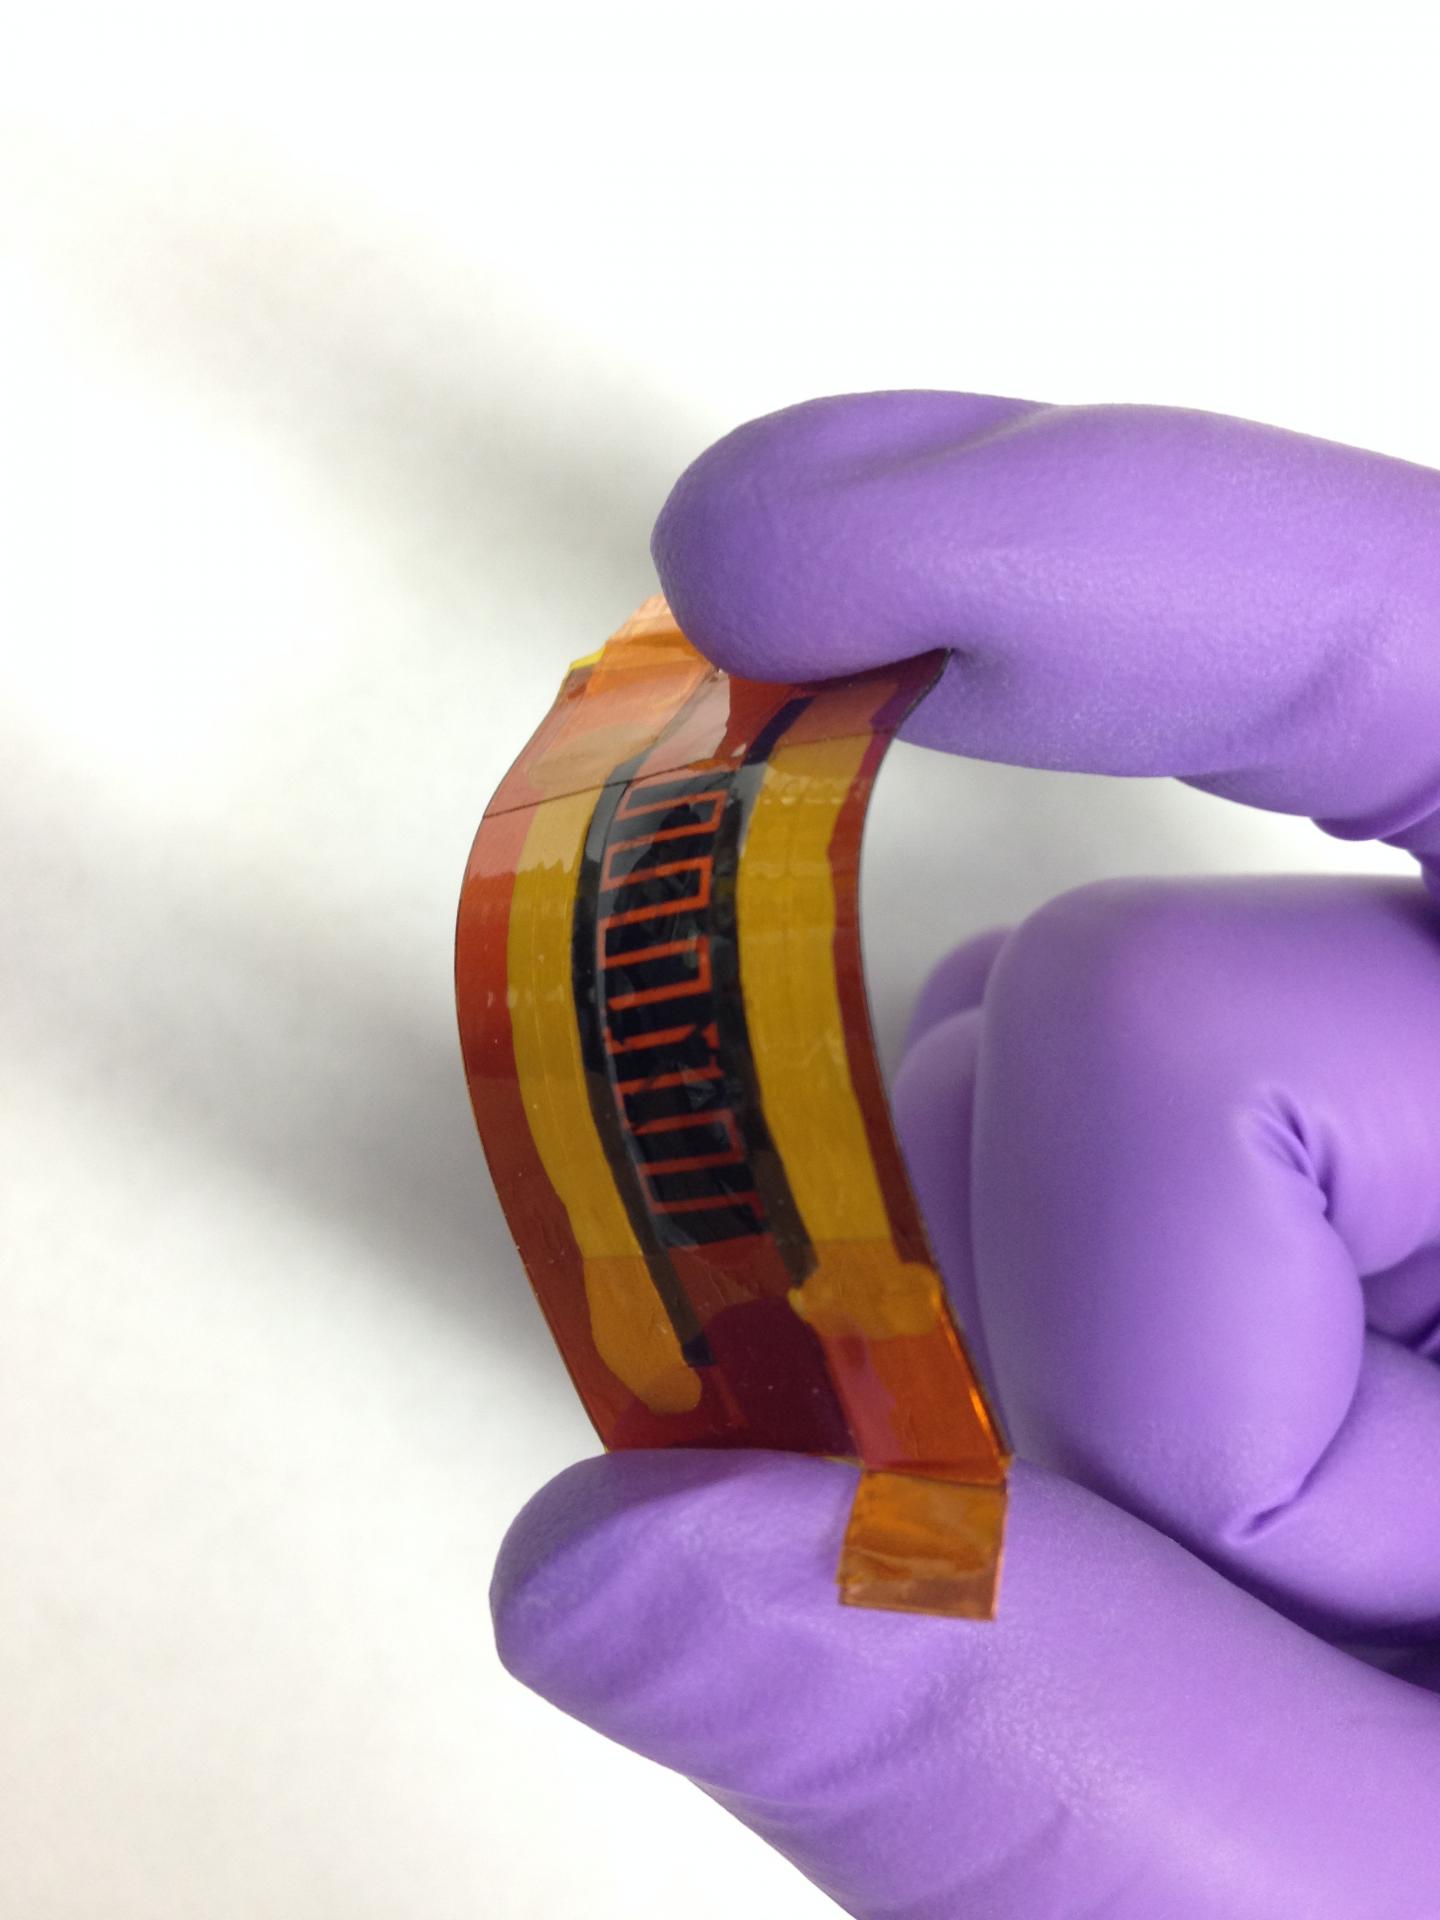 Device May Be Suitable for Flexible, Wearable Electronics